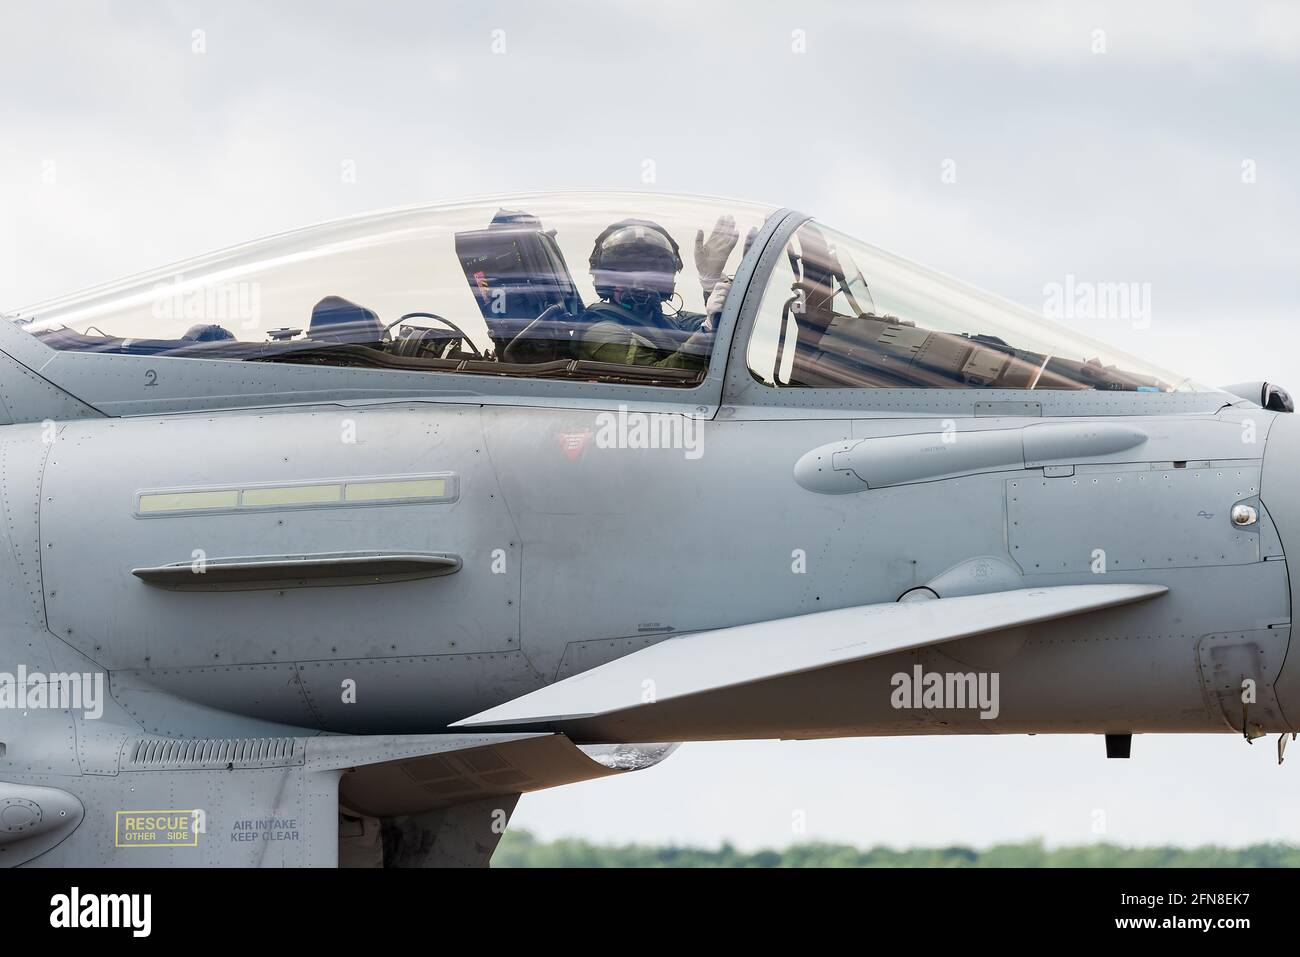 A Eurofighter Typhoon canard delta wing fighter jet of the Royal Air Force at RAF Fairford, United Kingdom. Stock Photo